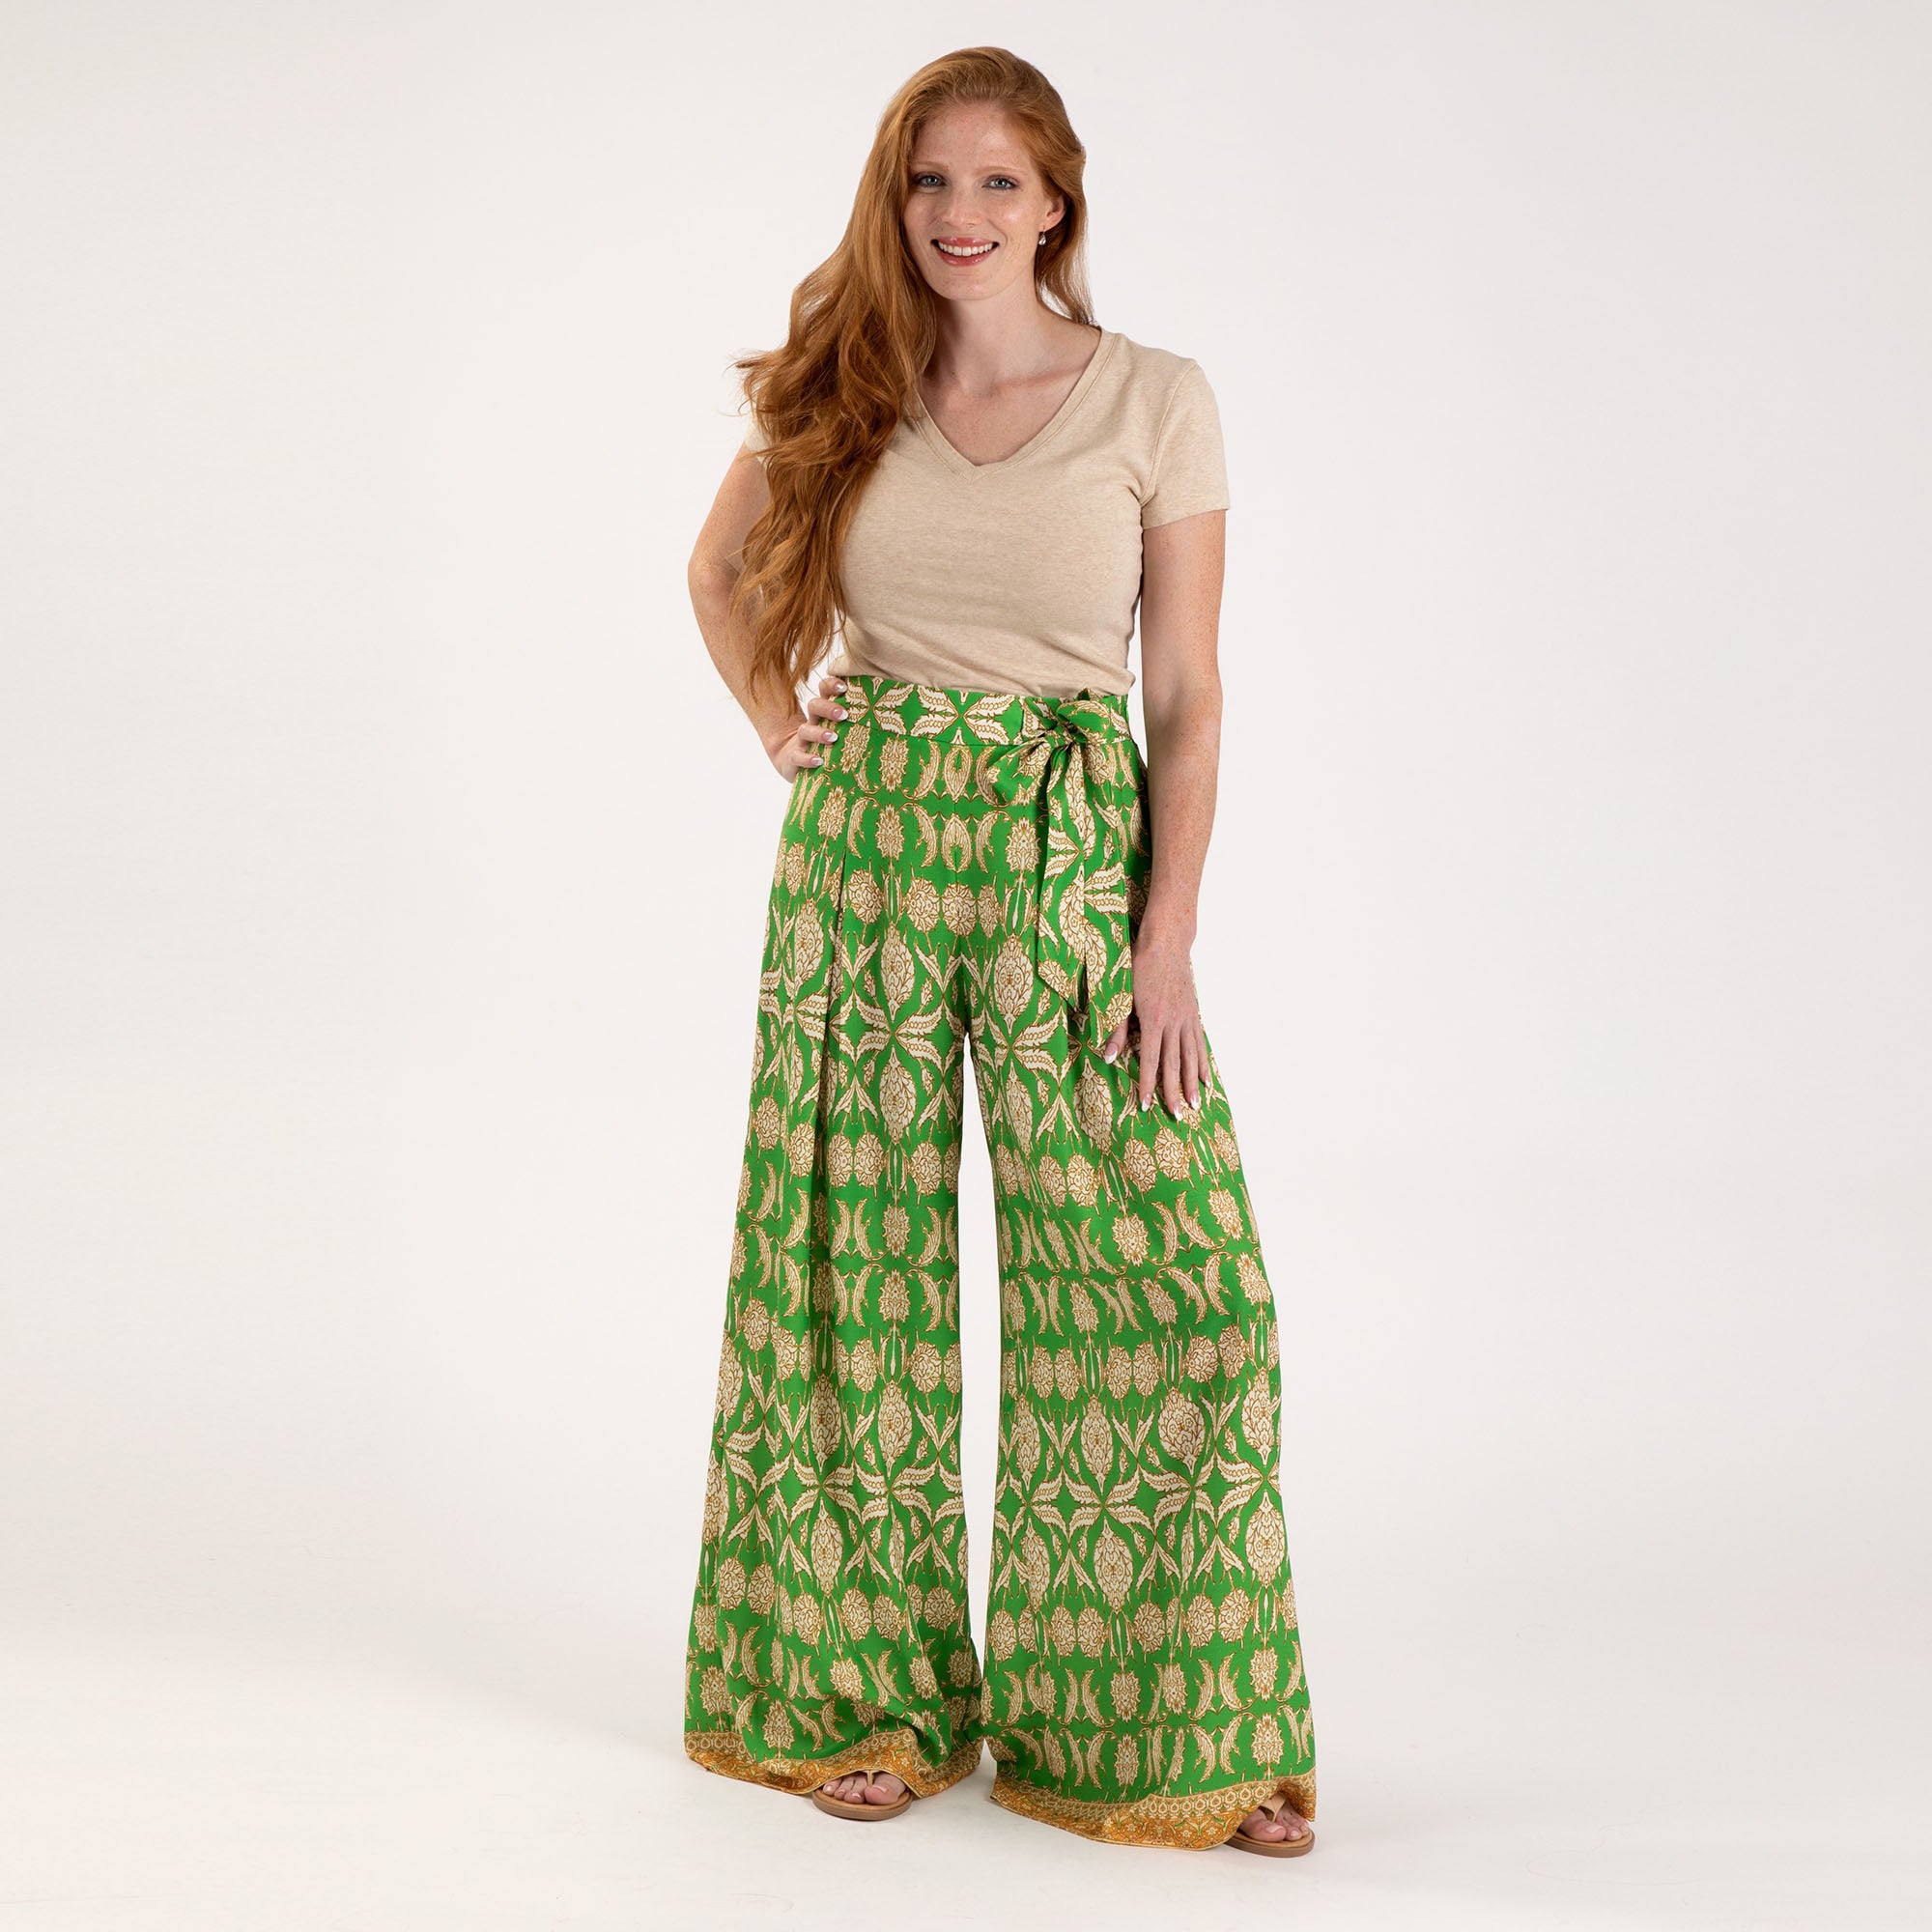 Concentric Design Flowing Pants - Green - S